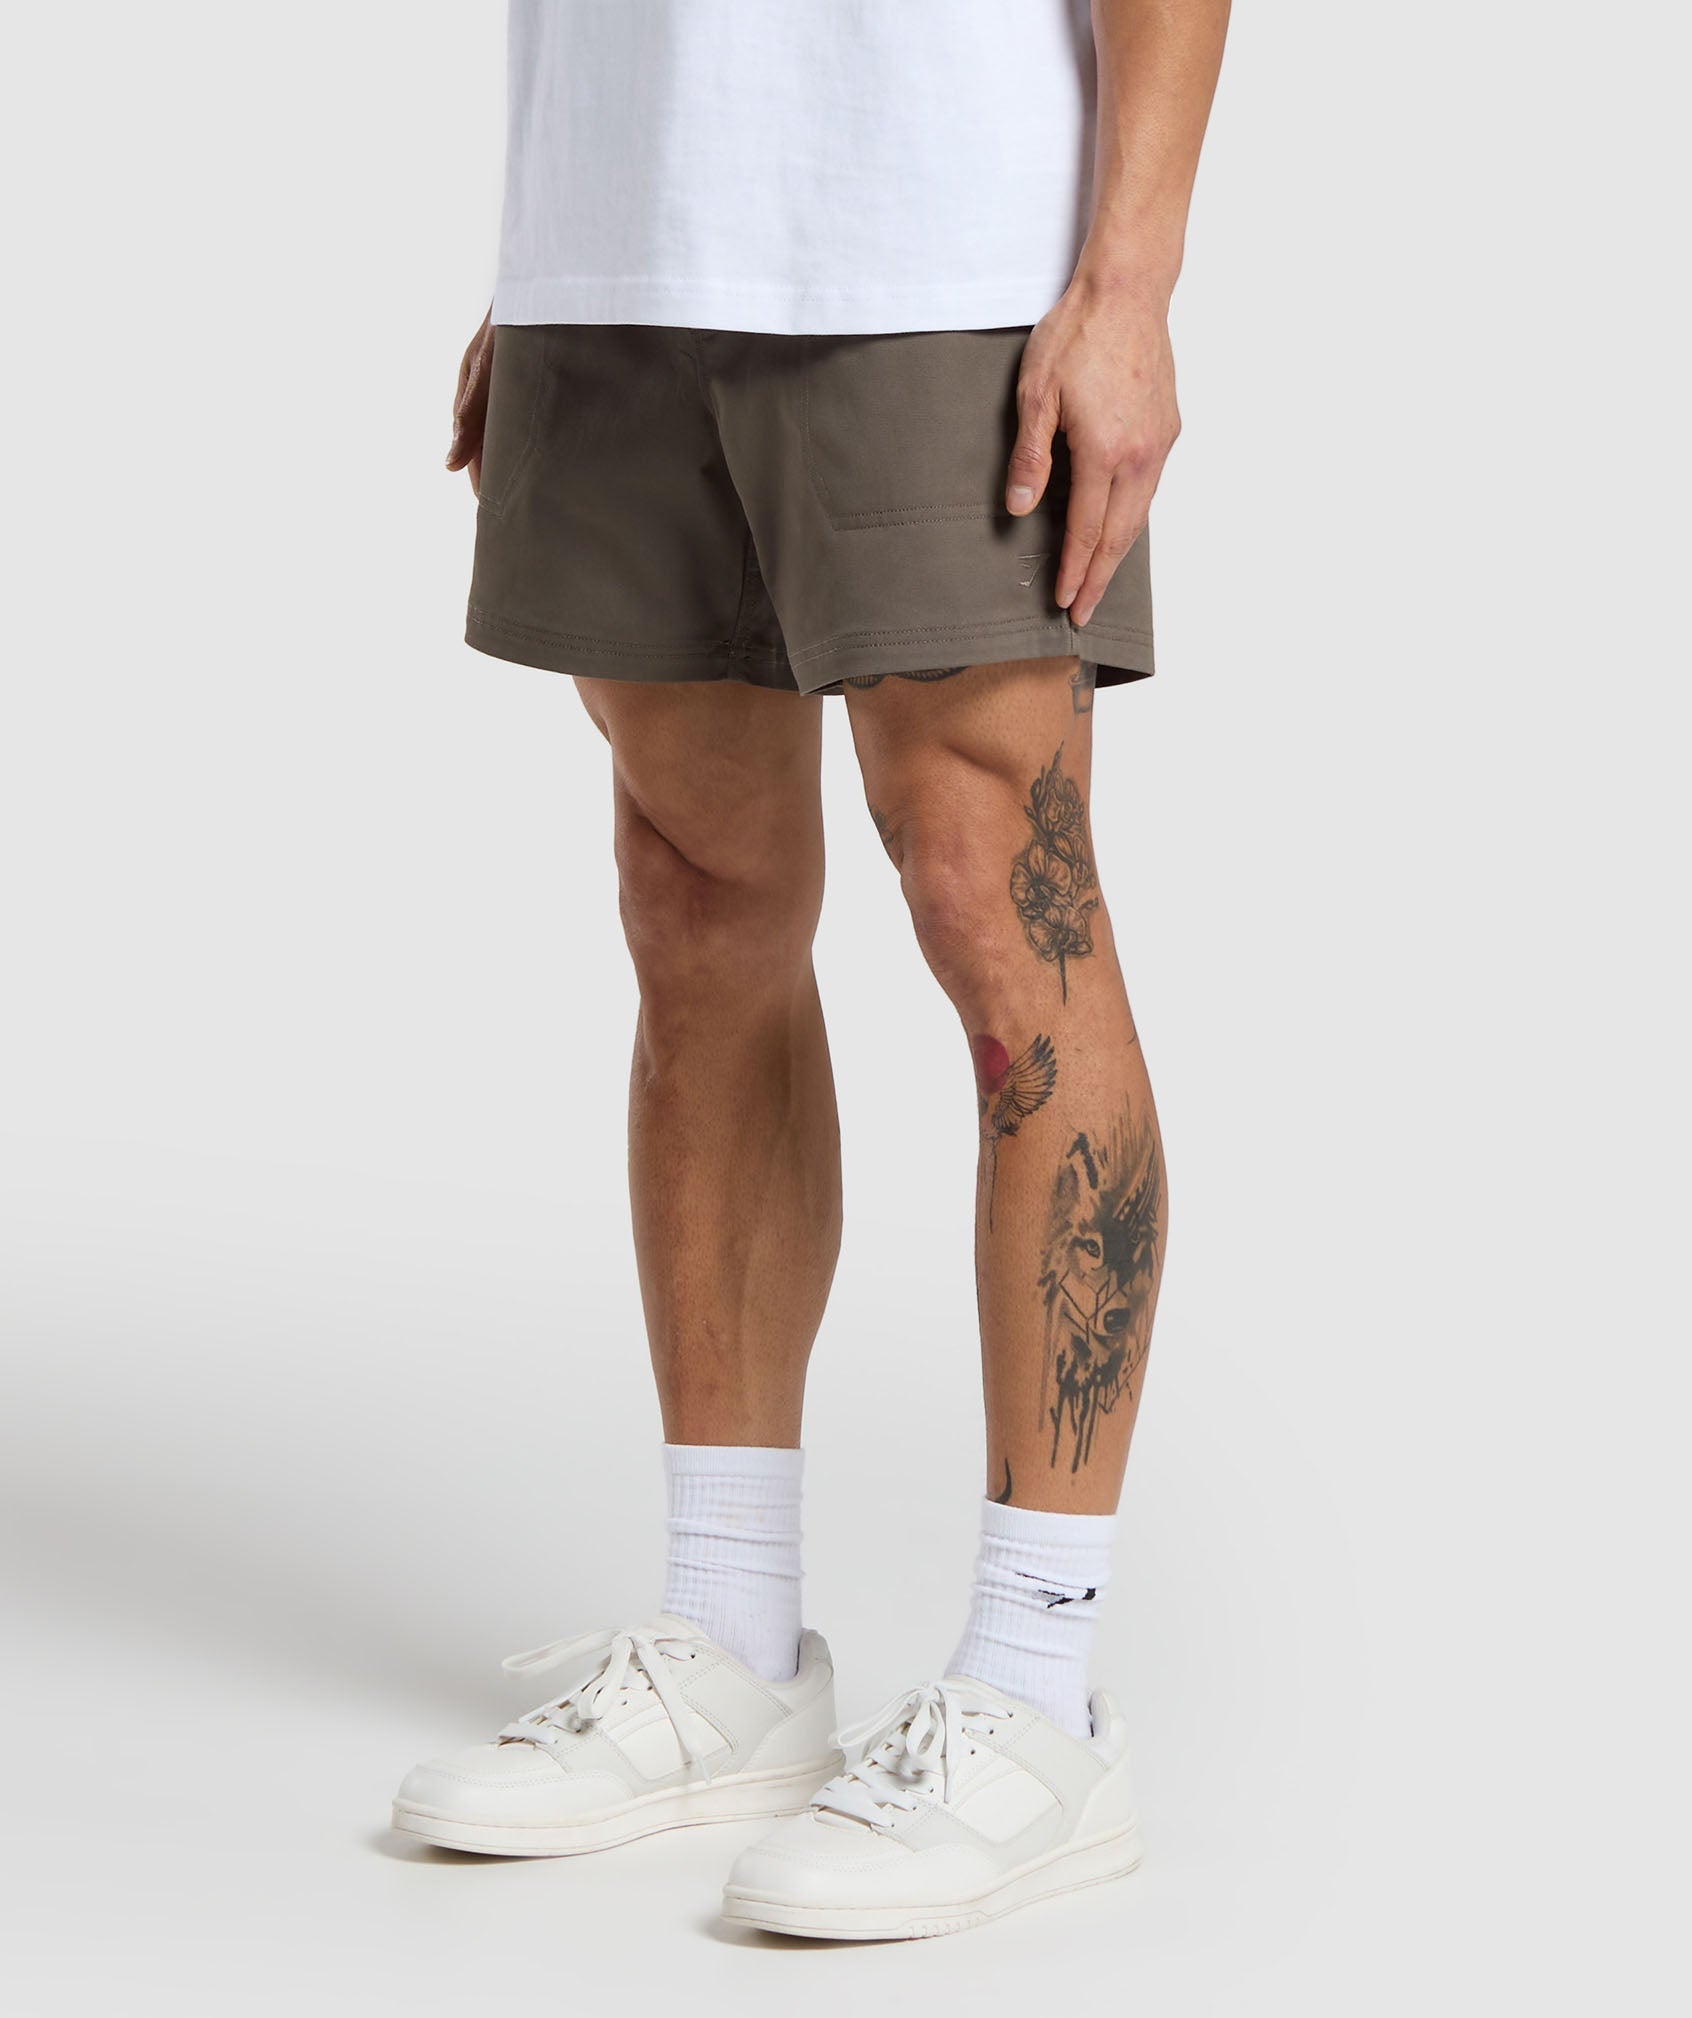 Rest Day Woven Shorts in Camo Brown - view 3